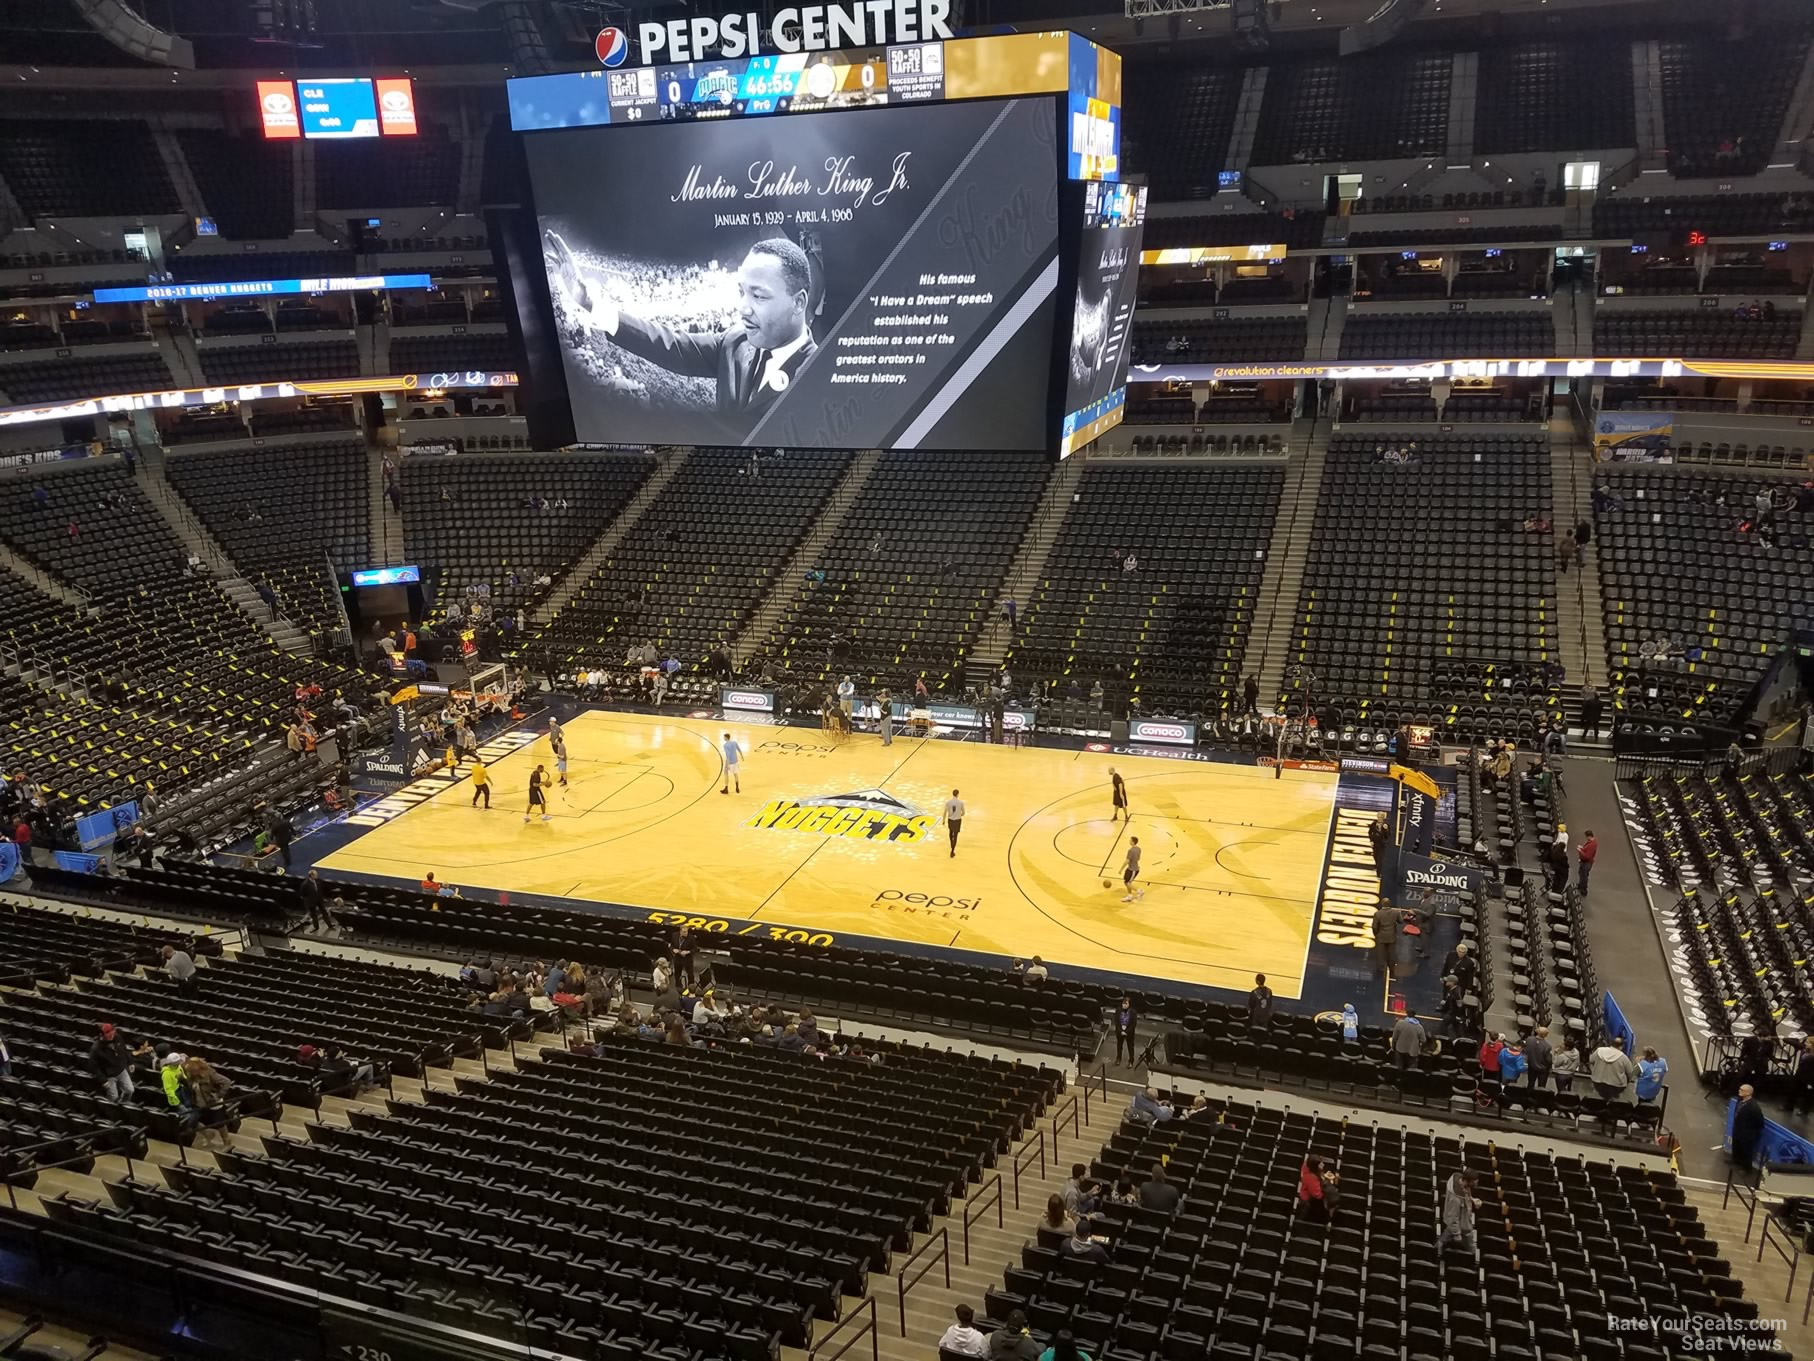 section 339, row 1 seat view  for basketball - ball arena